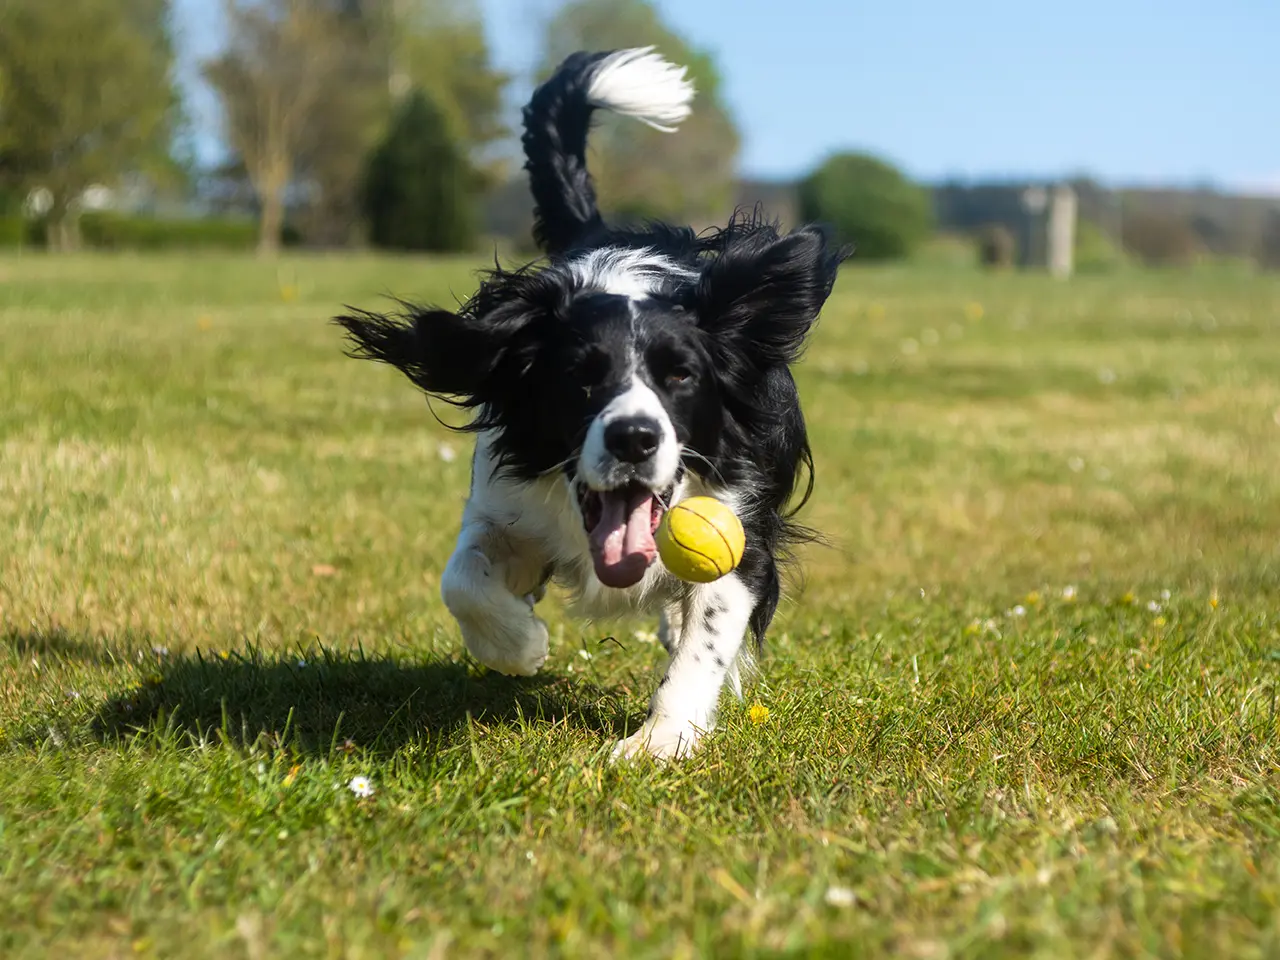 Black and white border collie puppy playing with green ball on grass field during daytime